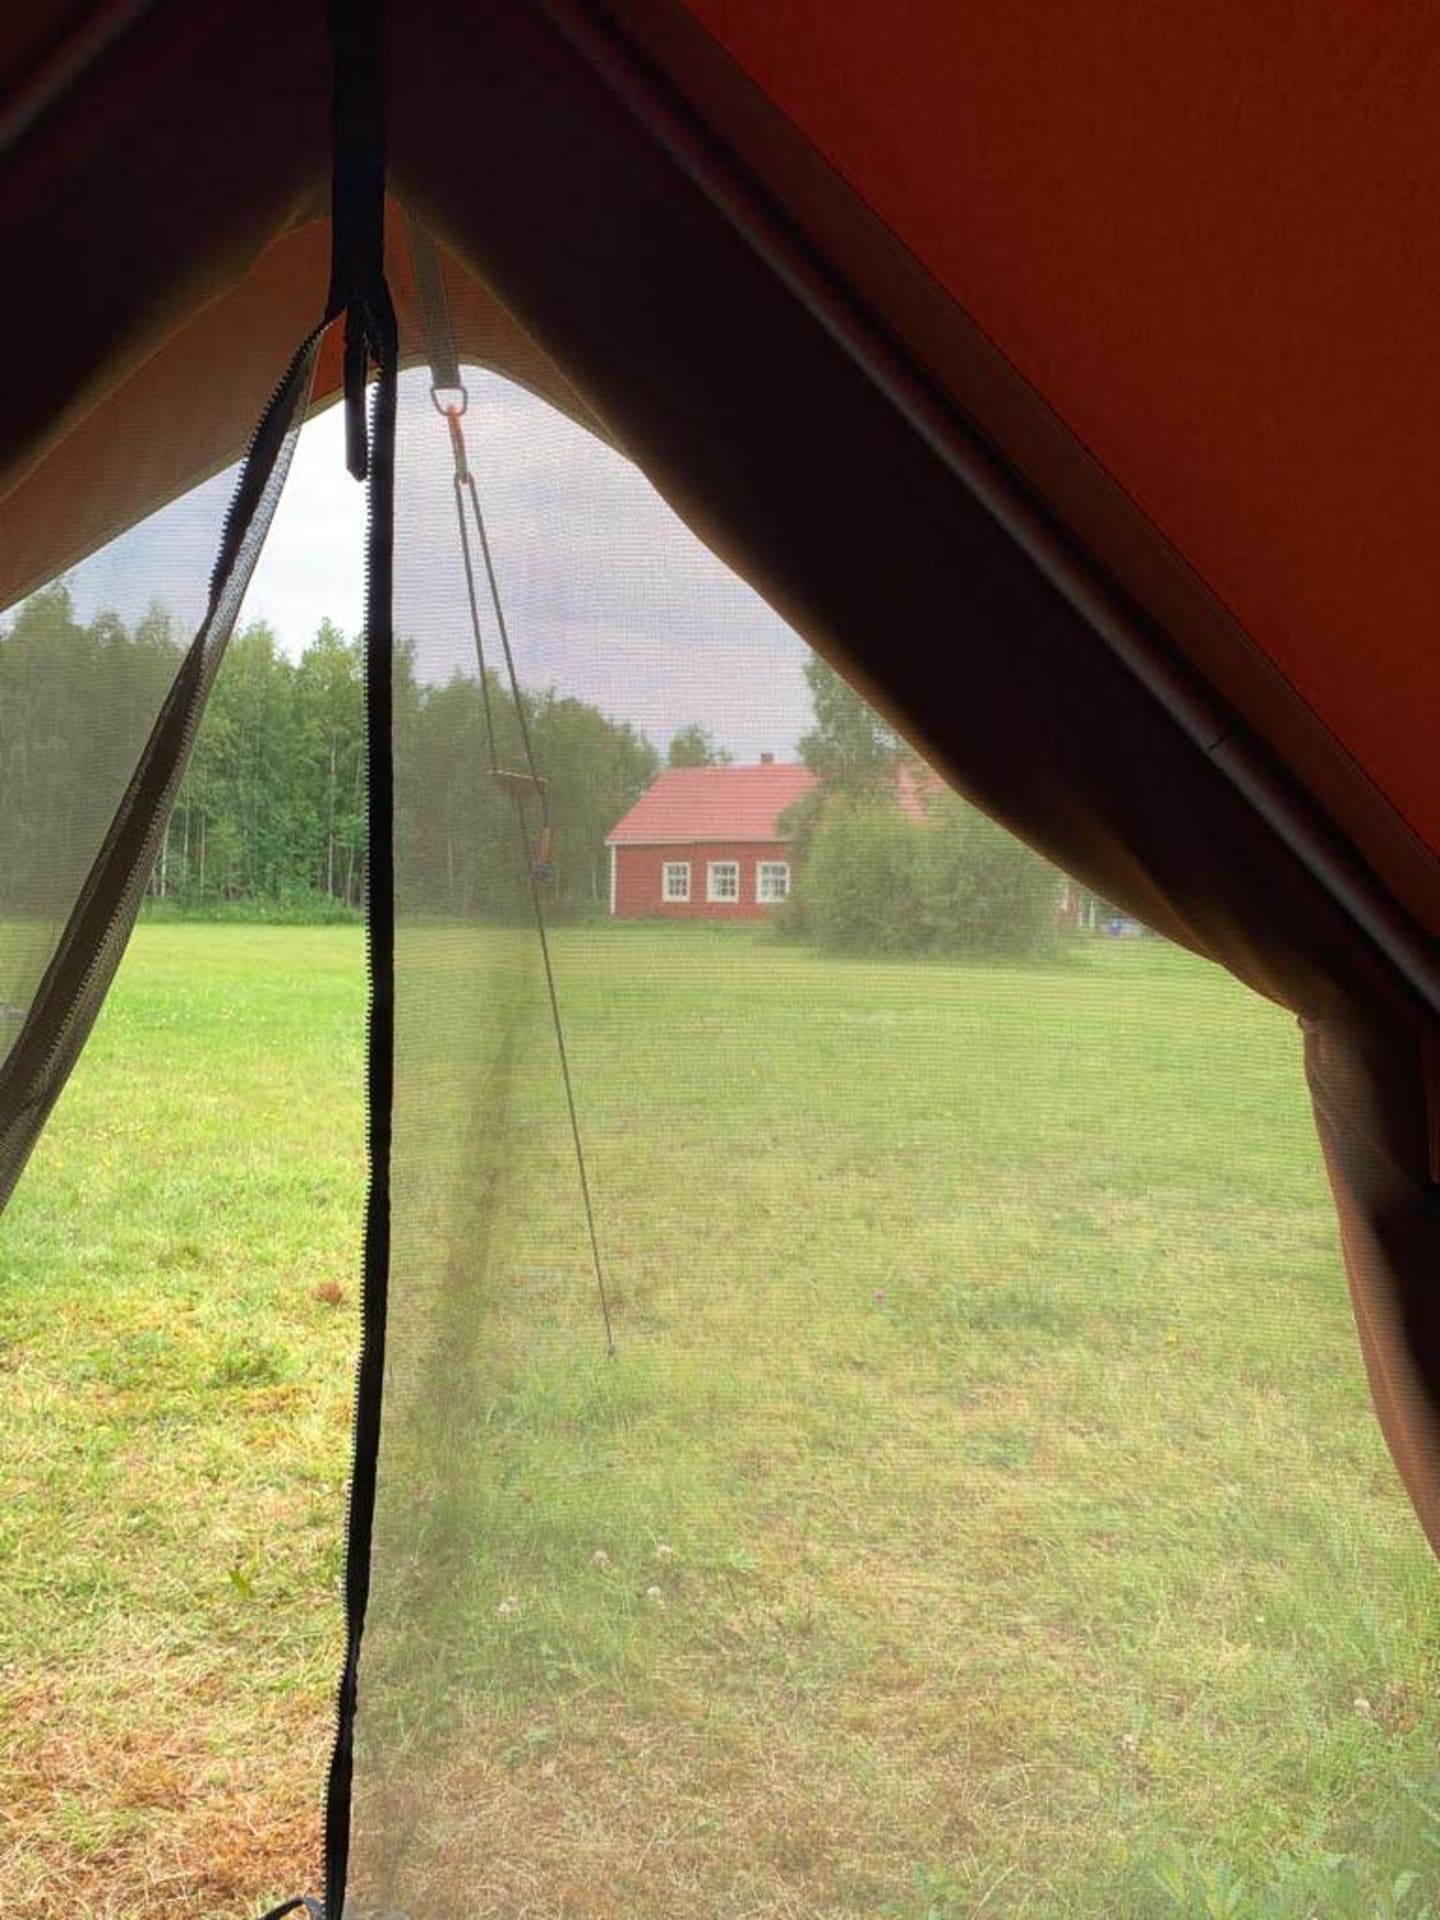 Glamping in Hailuoto. Mosquito net is all over tent.